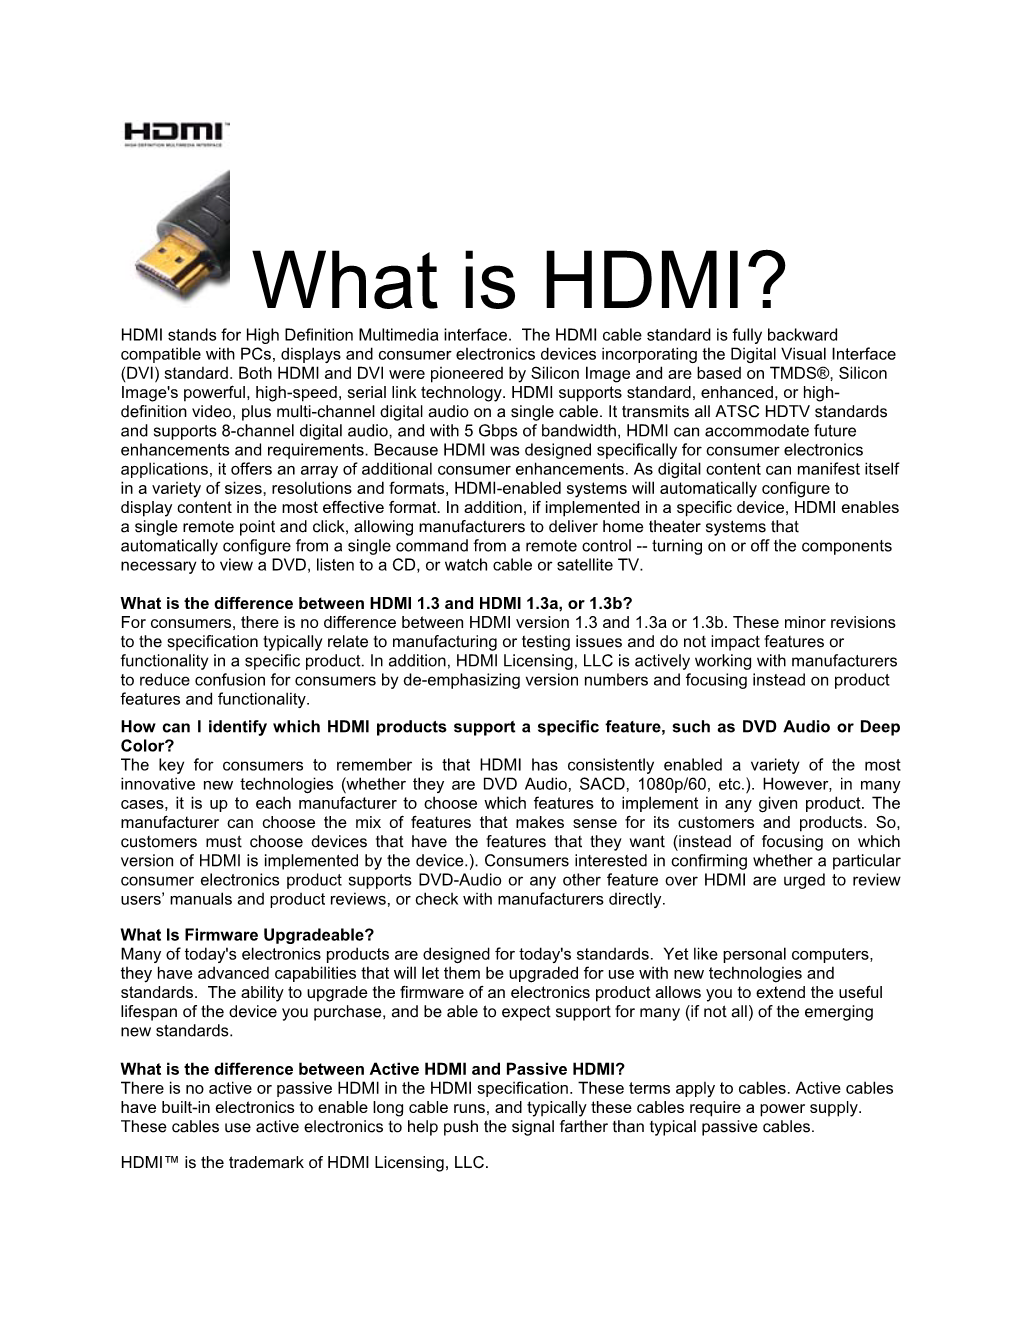 What Is HDMI? HDMI Stands for High Definition Multimedia Interface